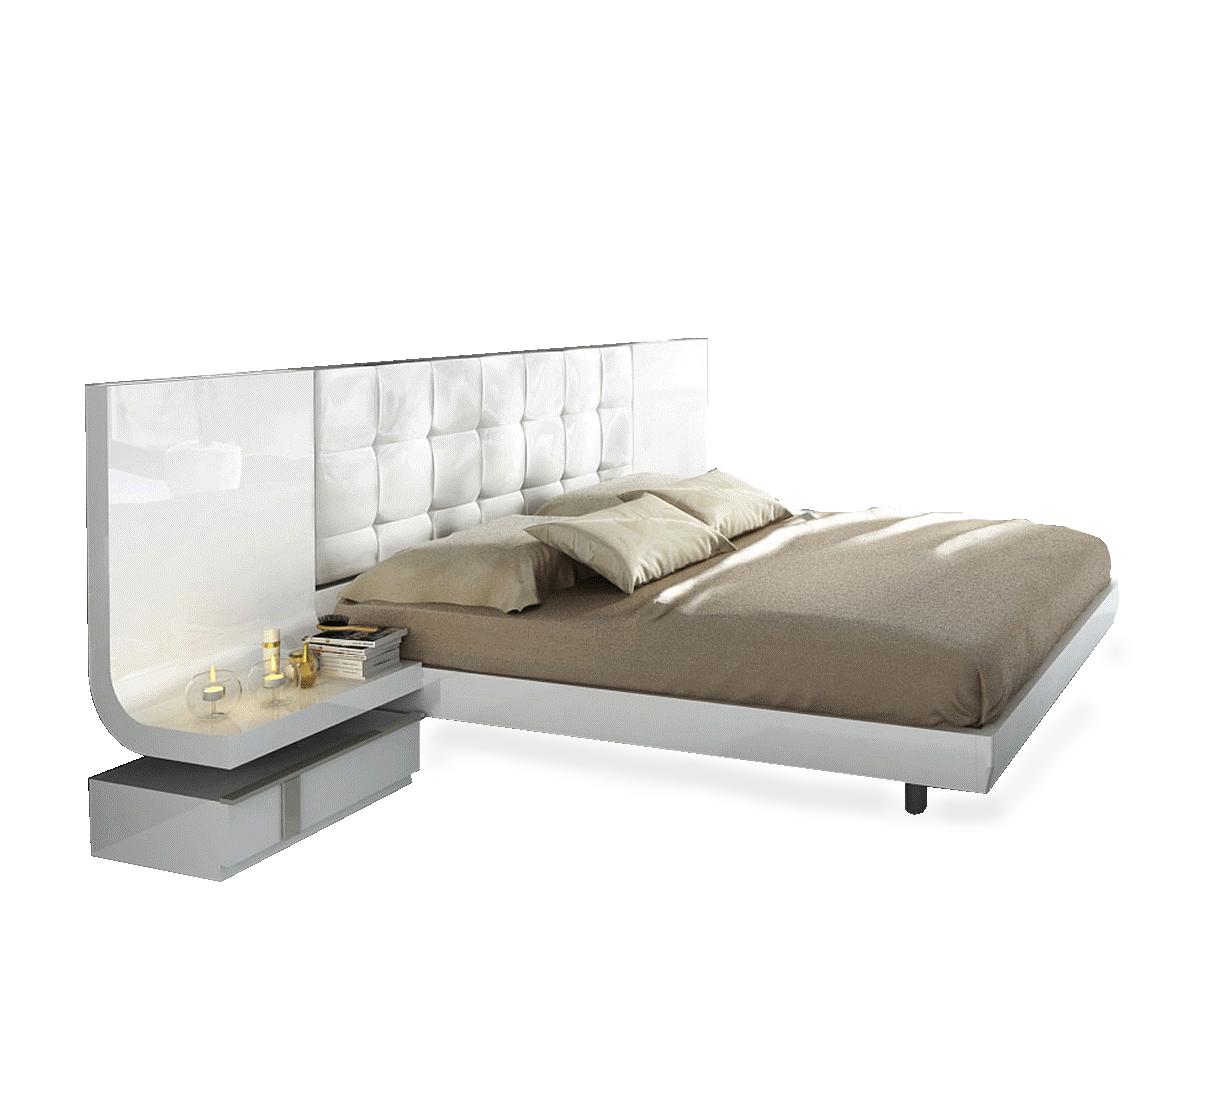 

    
Glossy White King Bedroom Set 5Pcs Contemporary Made in Spain ESF Granada
